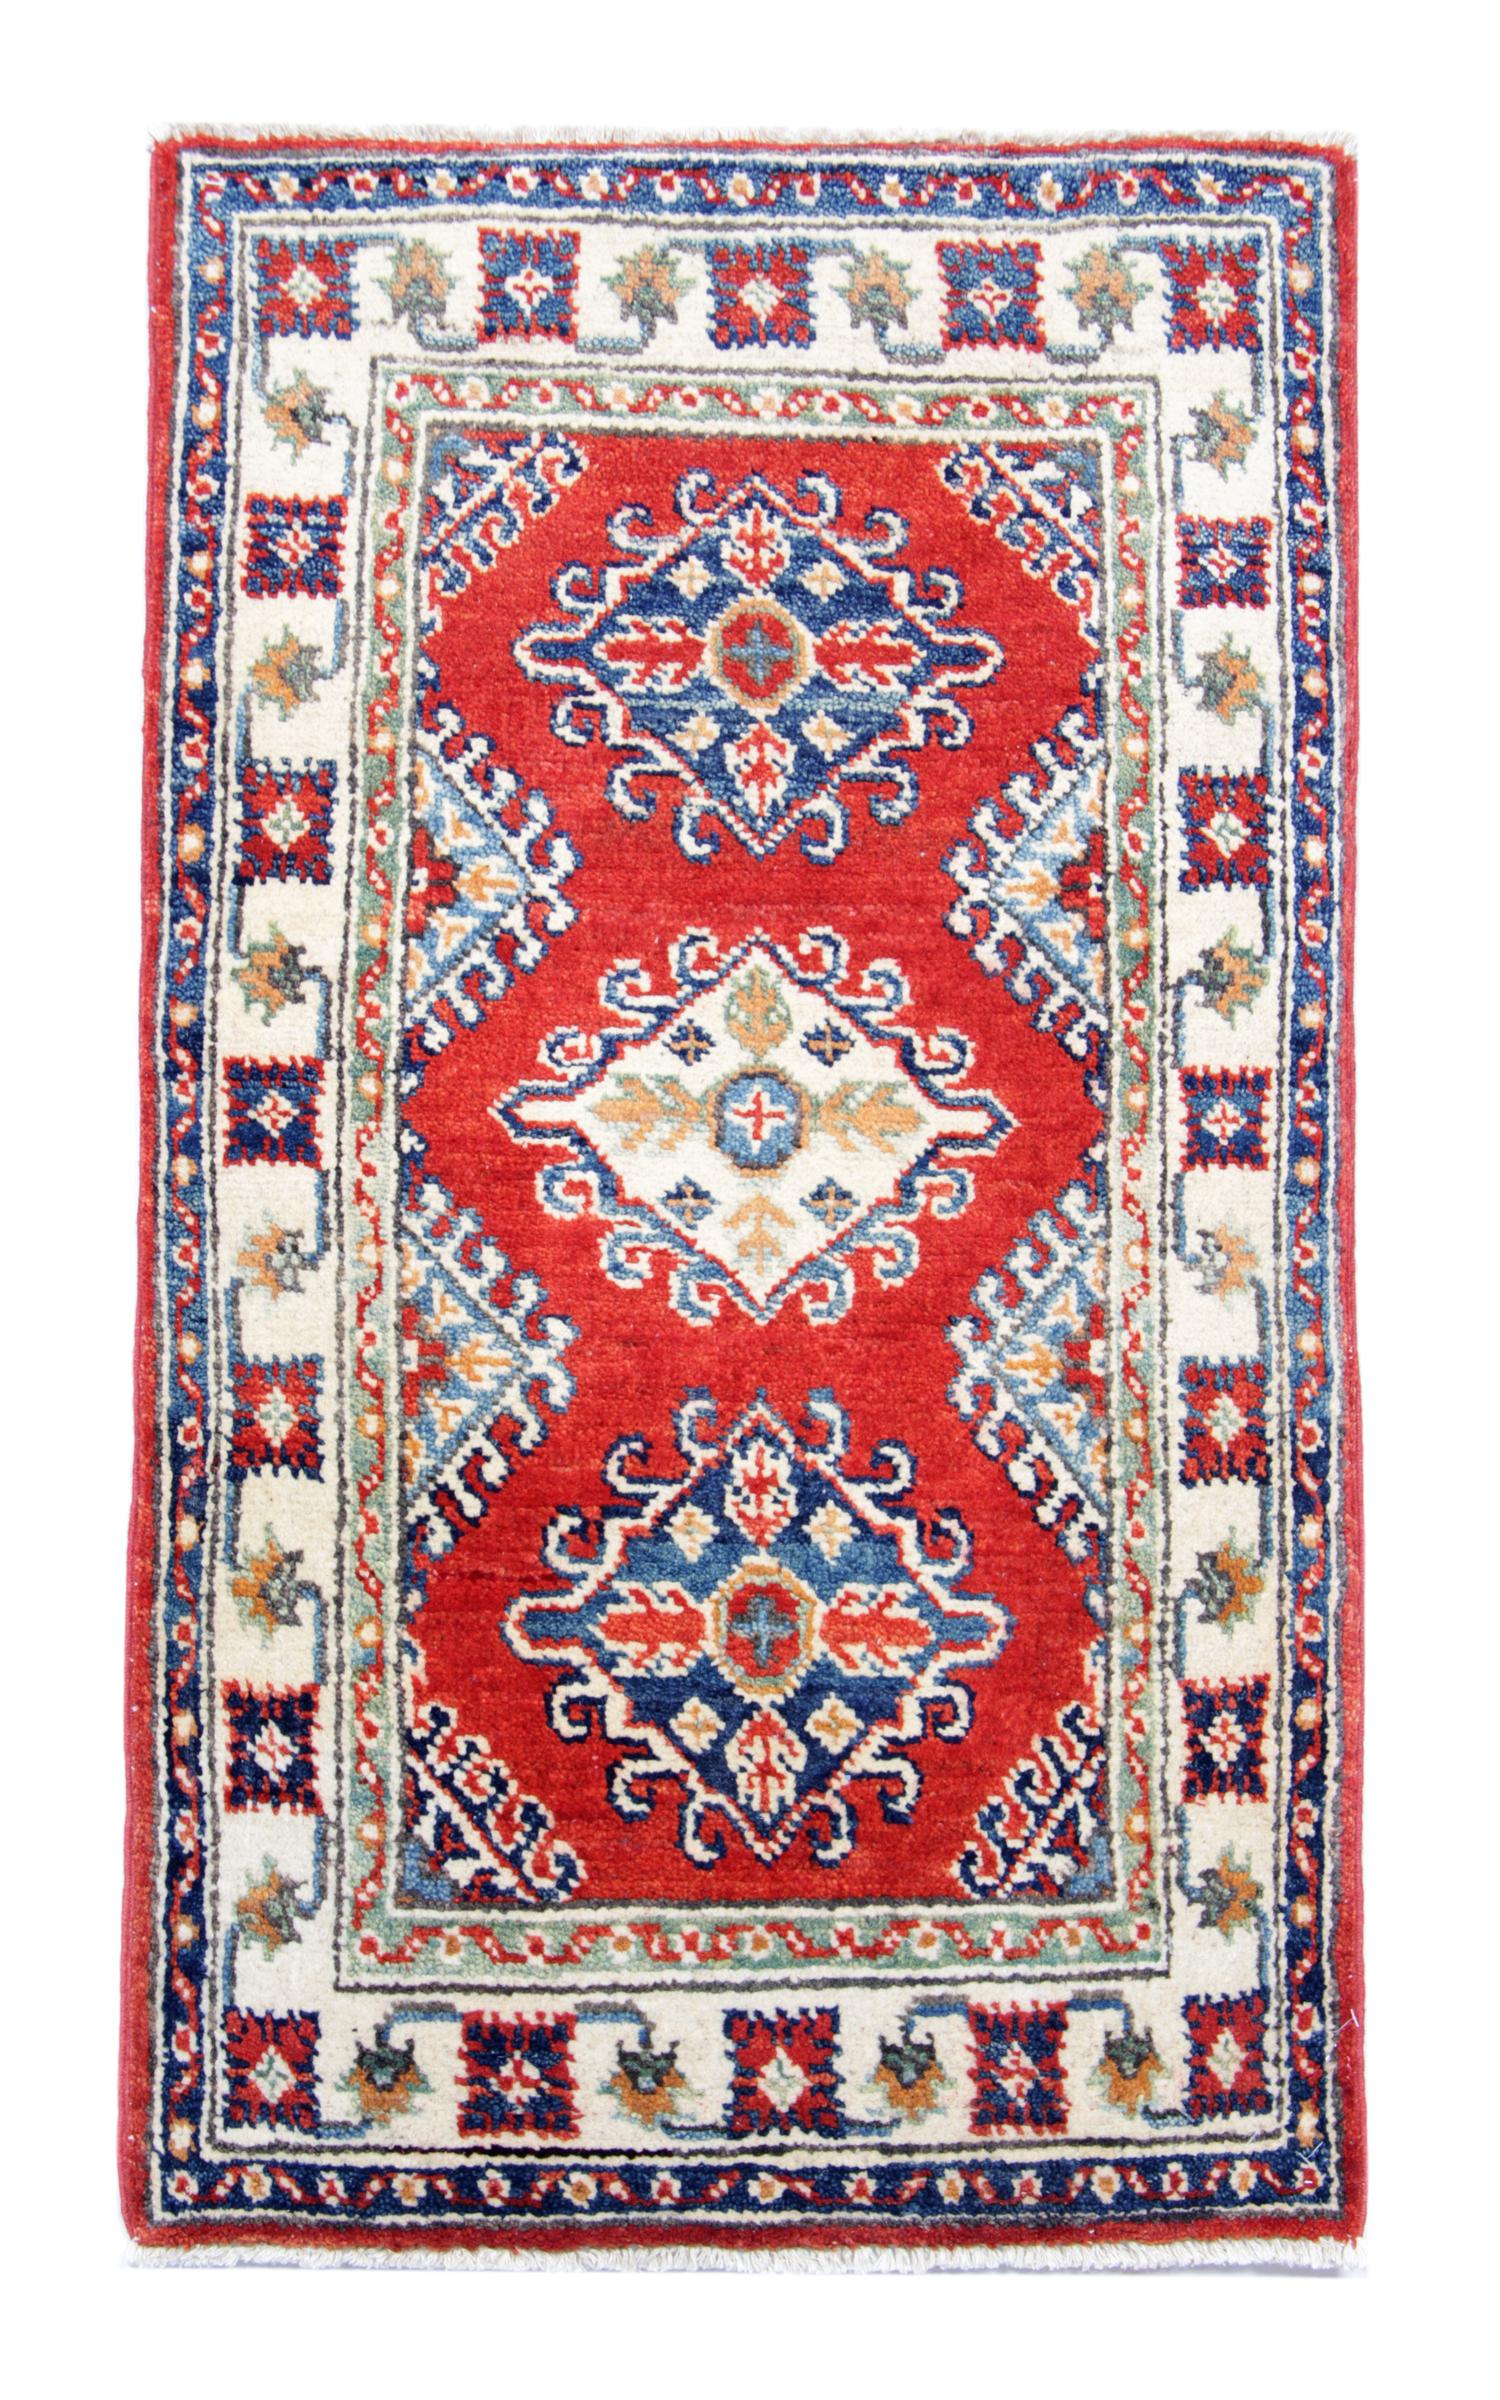 These tiny new traditional handmade rugs feature designs from the Kazak region. A conventional tribal rug is famous in the part of Kazak Area. Afghan weavers have made this handwoven rug of top-quality wool and cotton. This carpet rug features